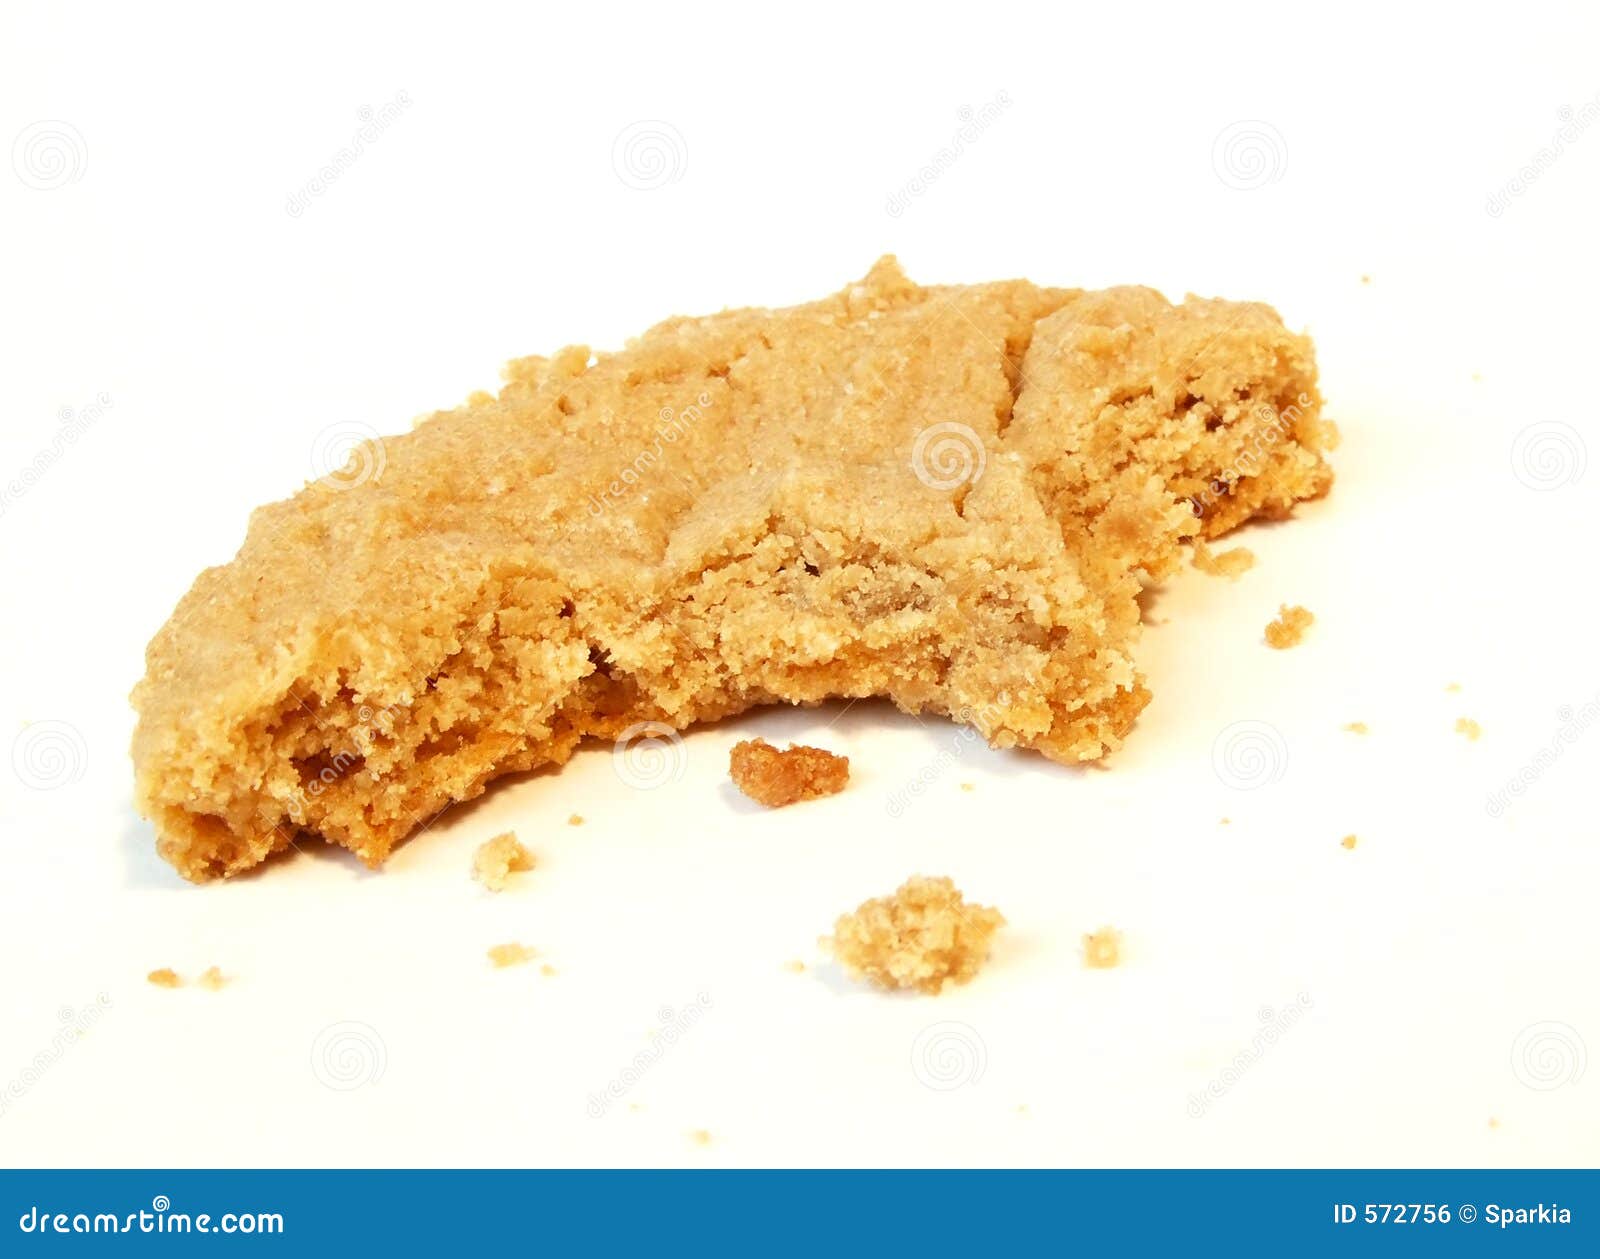 cookie with bite and crumbs